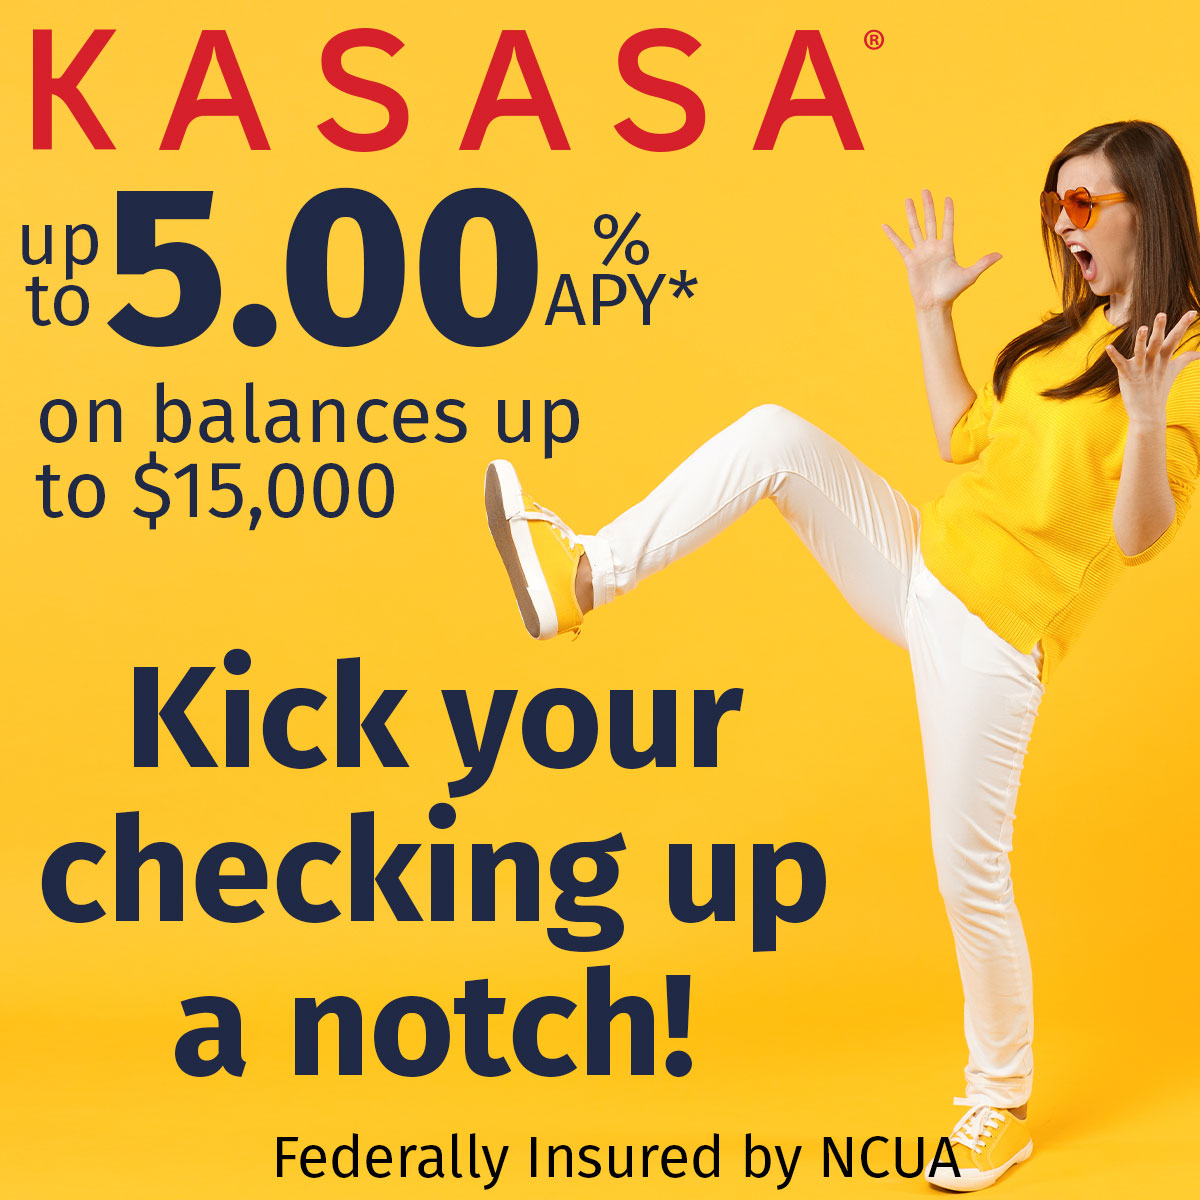 Are you earning 5.00% APY* on your checking account balance? If not, it's time to upgrade to an Atlantic Kasasa Cash Free Checking account. Get rewarded just for doing your regular banking. Visit our website for details. #AskForKasasa #FreeCheckingWithRewards